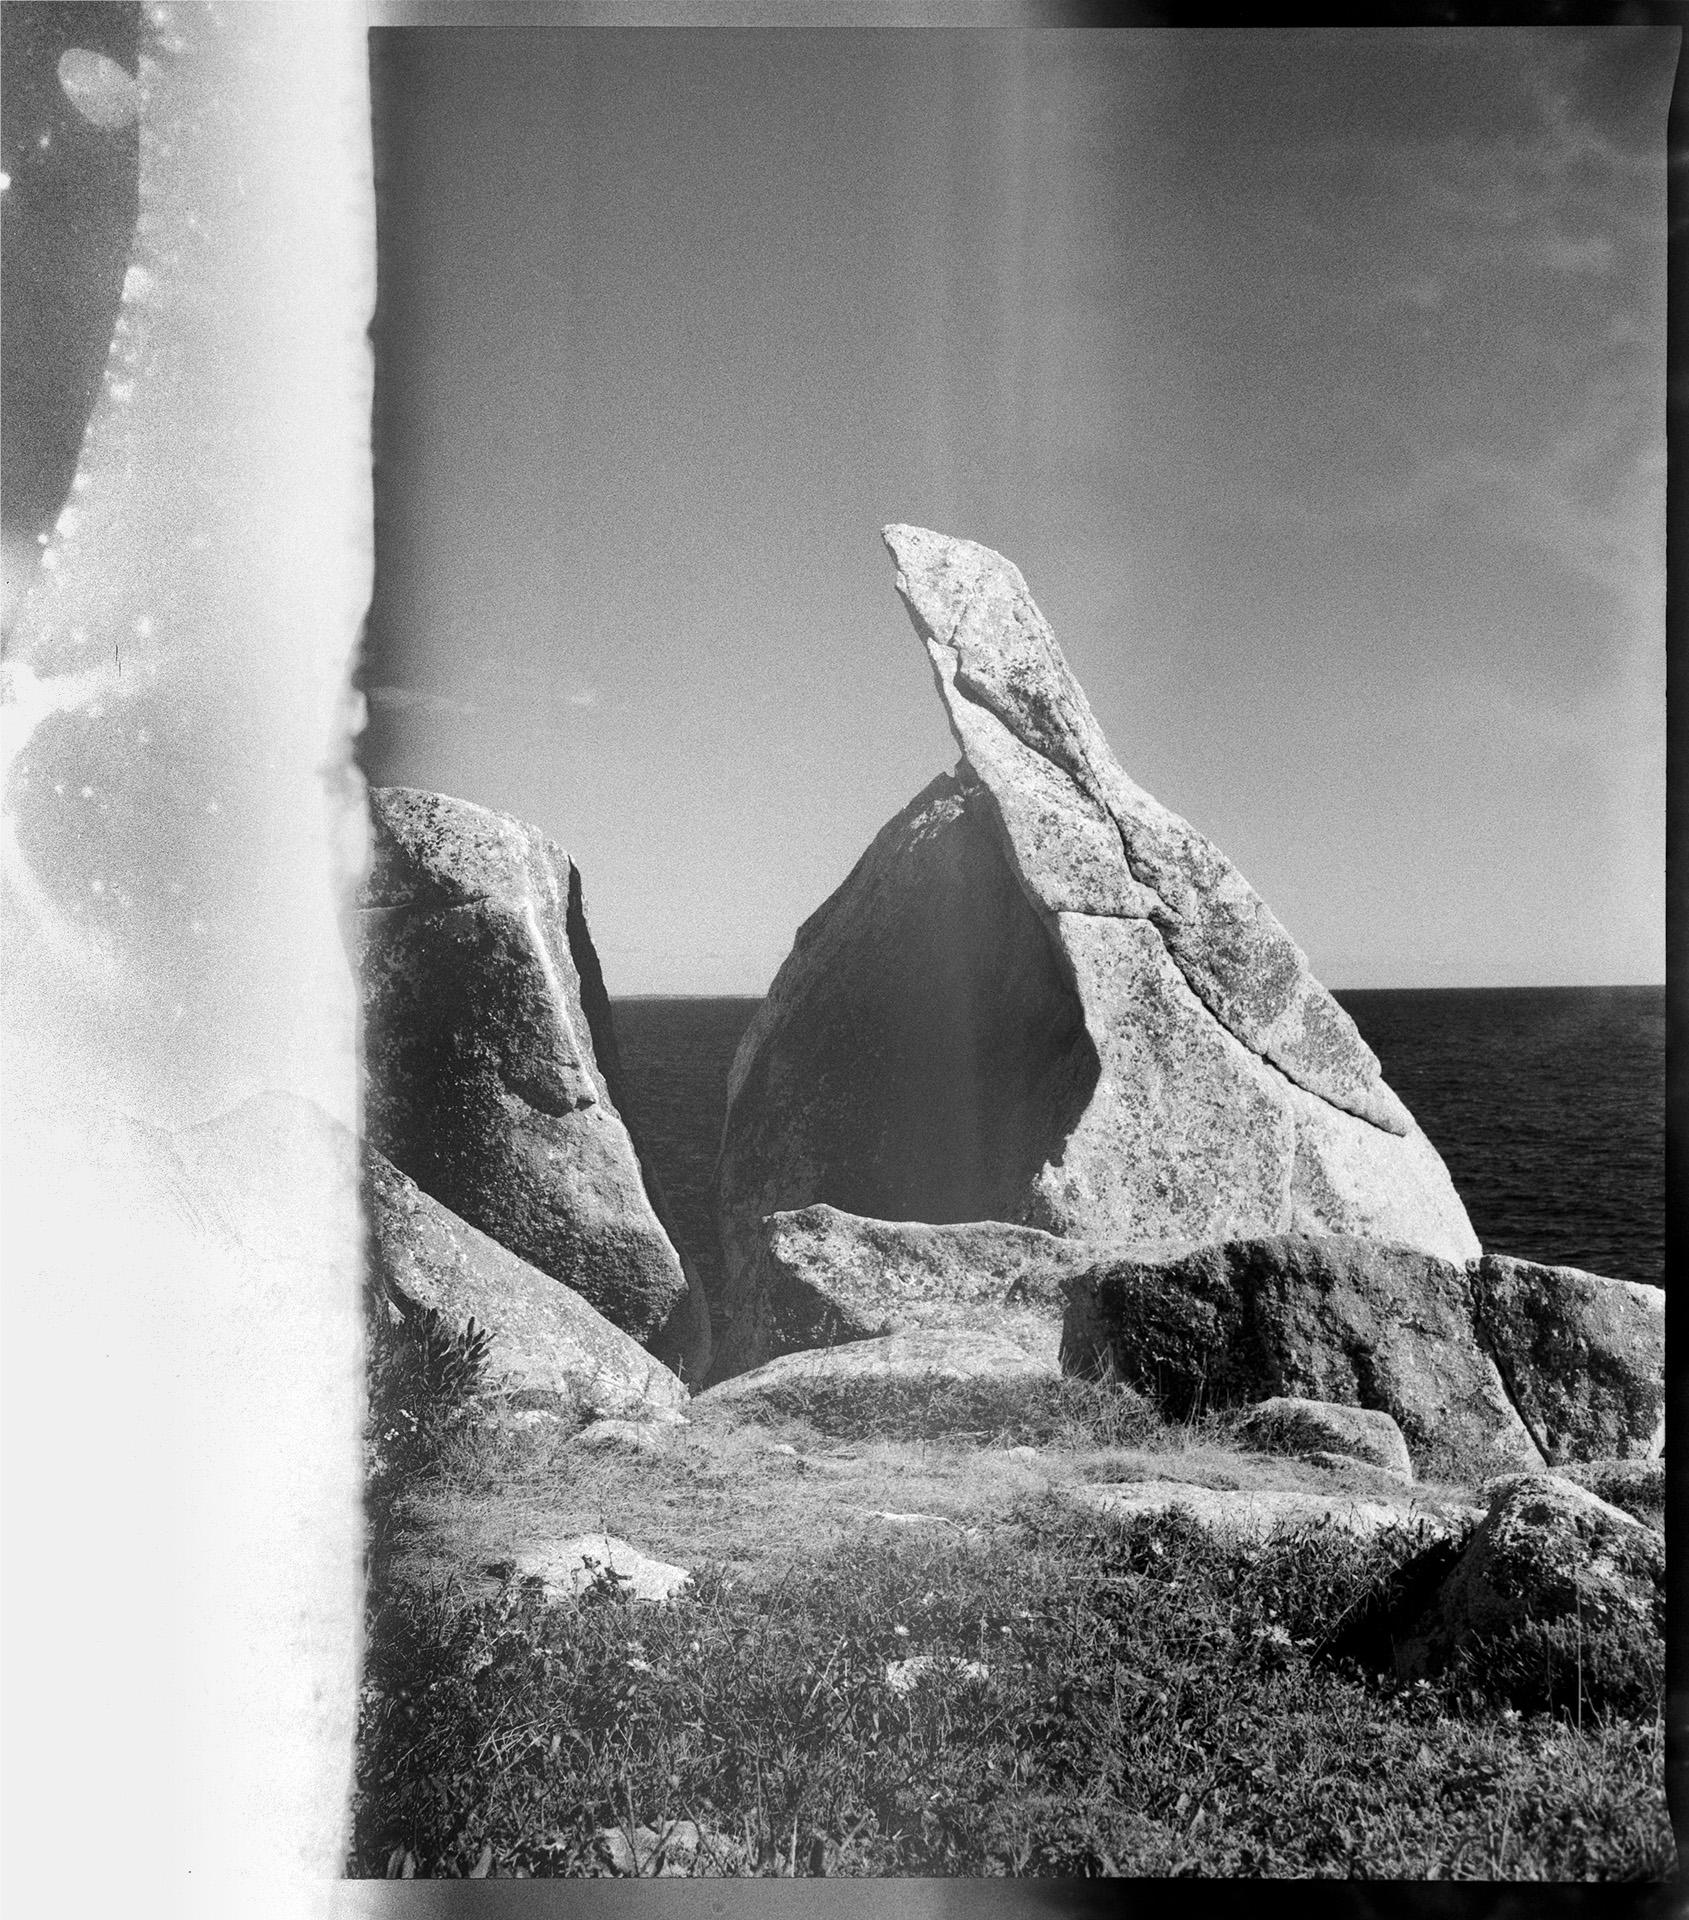 Two large boulders in front of the ocean, that look as if they were split from one boulder. The image is in black and white film and there are fluid looking distortions on the surface of the film. On the left side of the film the image is white with grey drip marks.